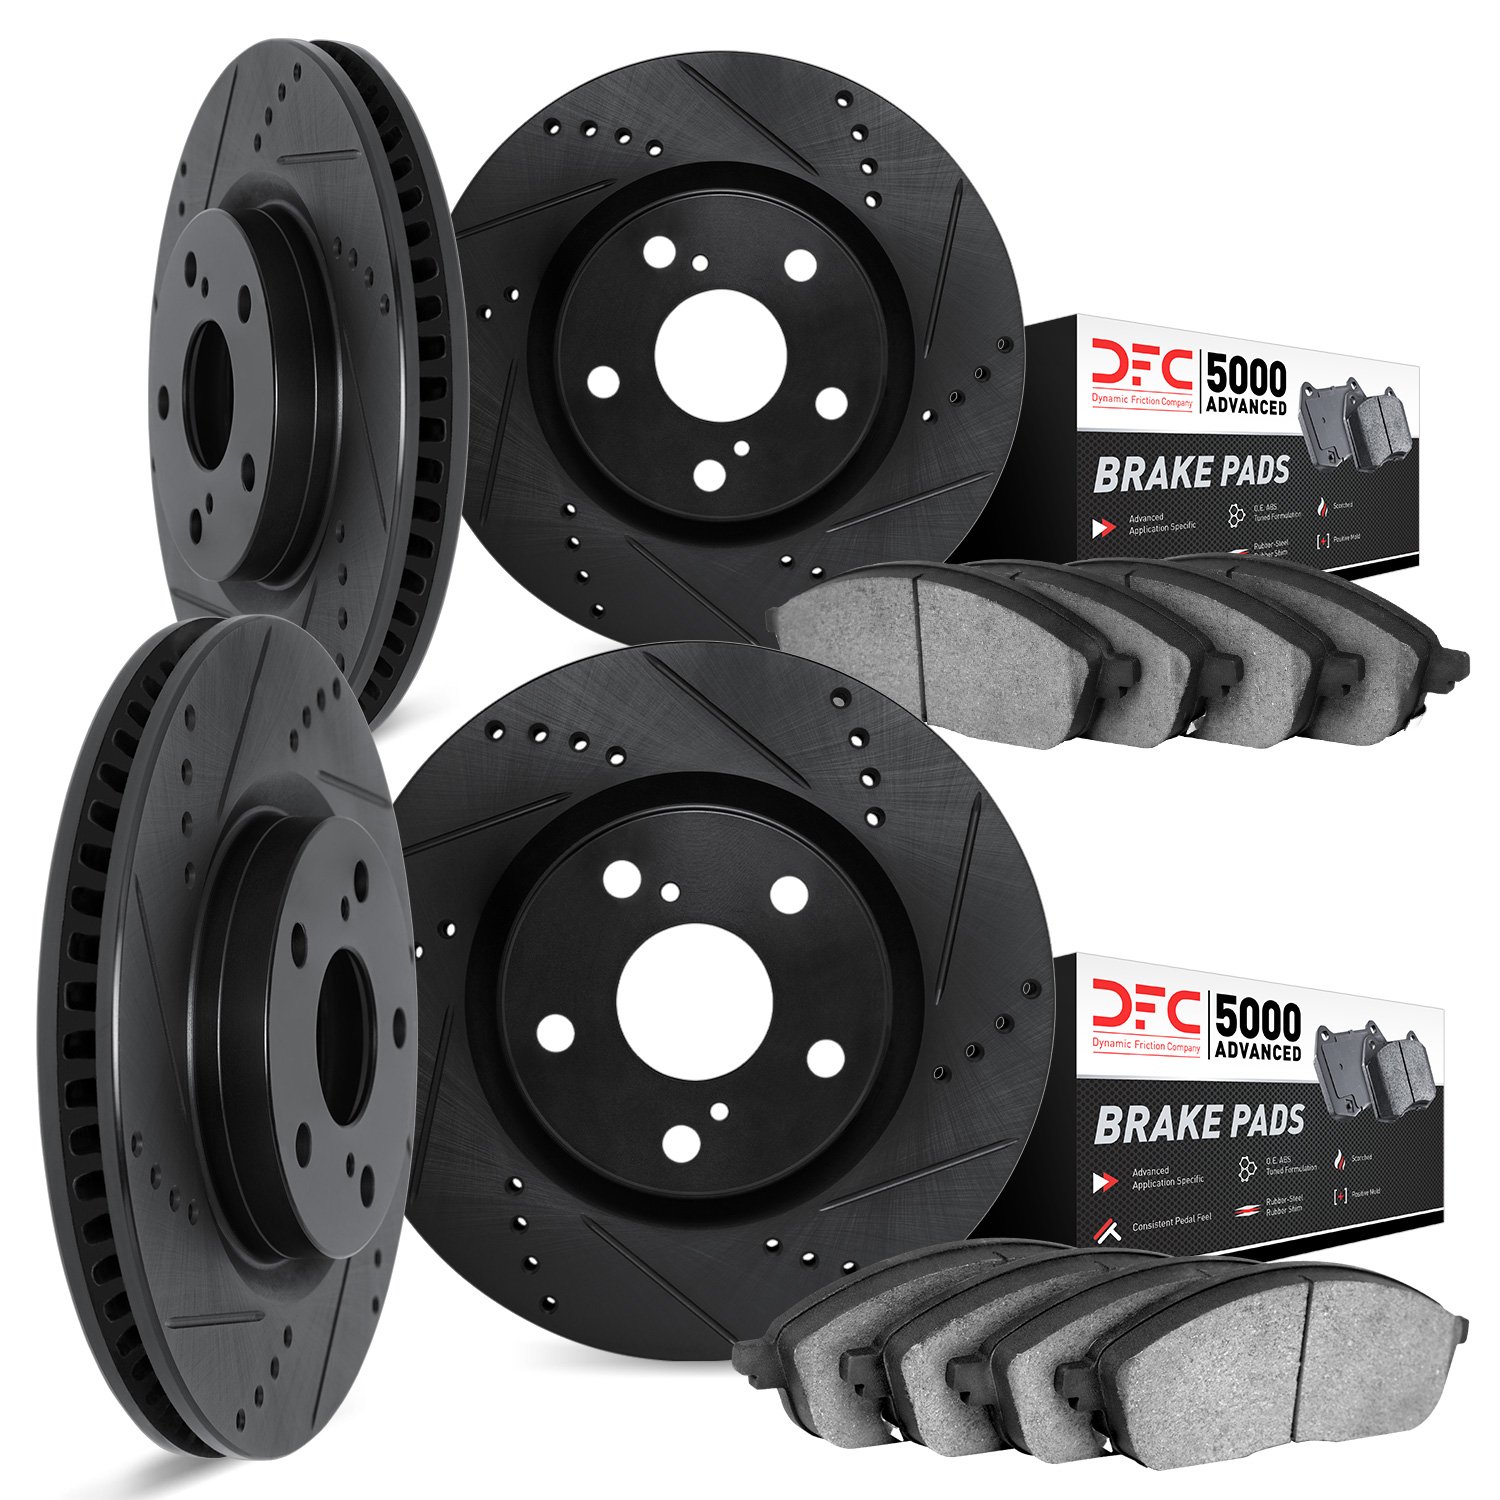 8504-74086 Drilled/Slotted Brake Rotors w/5000 Advanced Brake Pads Kit [Black], 2011-2014 Porsche, Position: Front and Rear